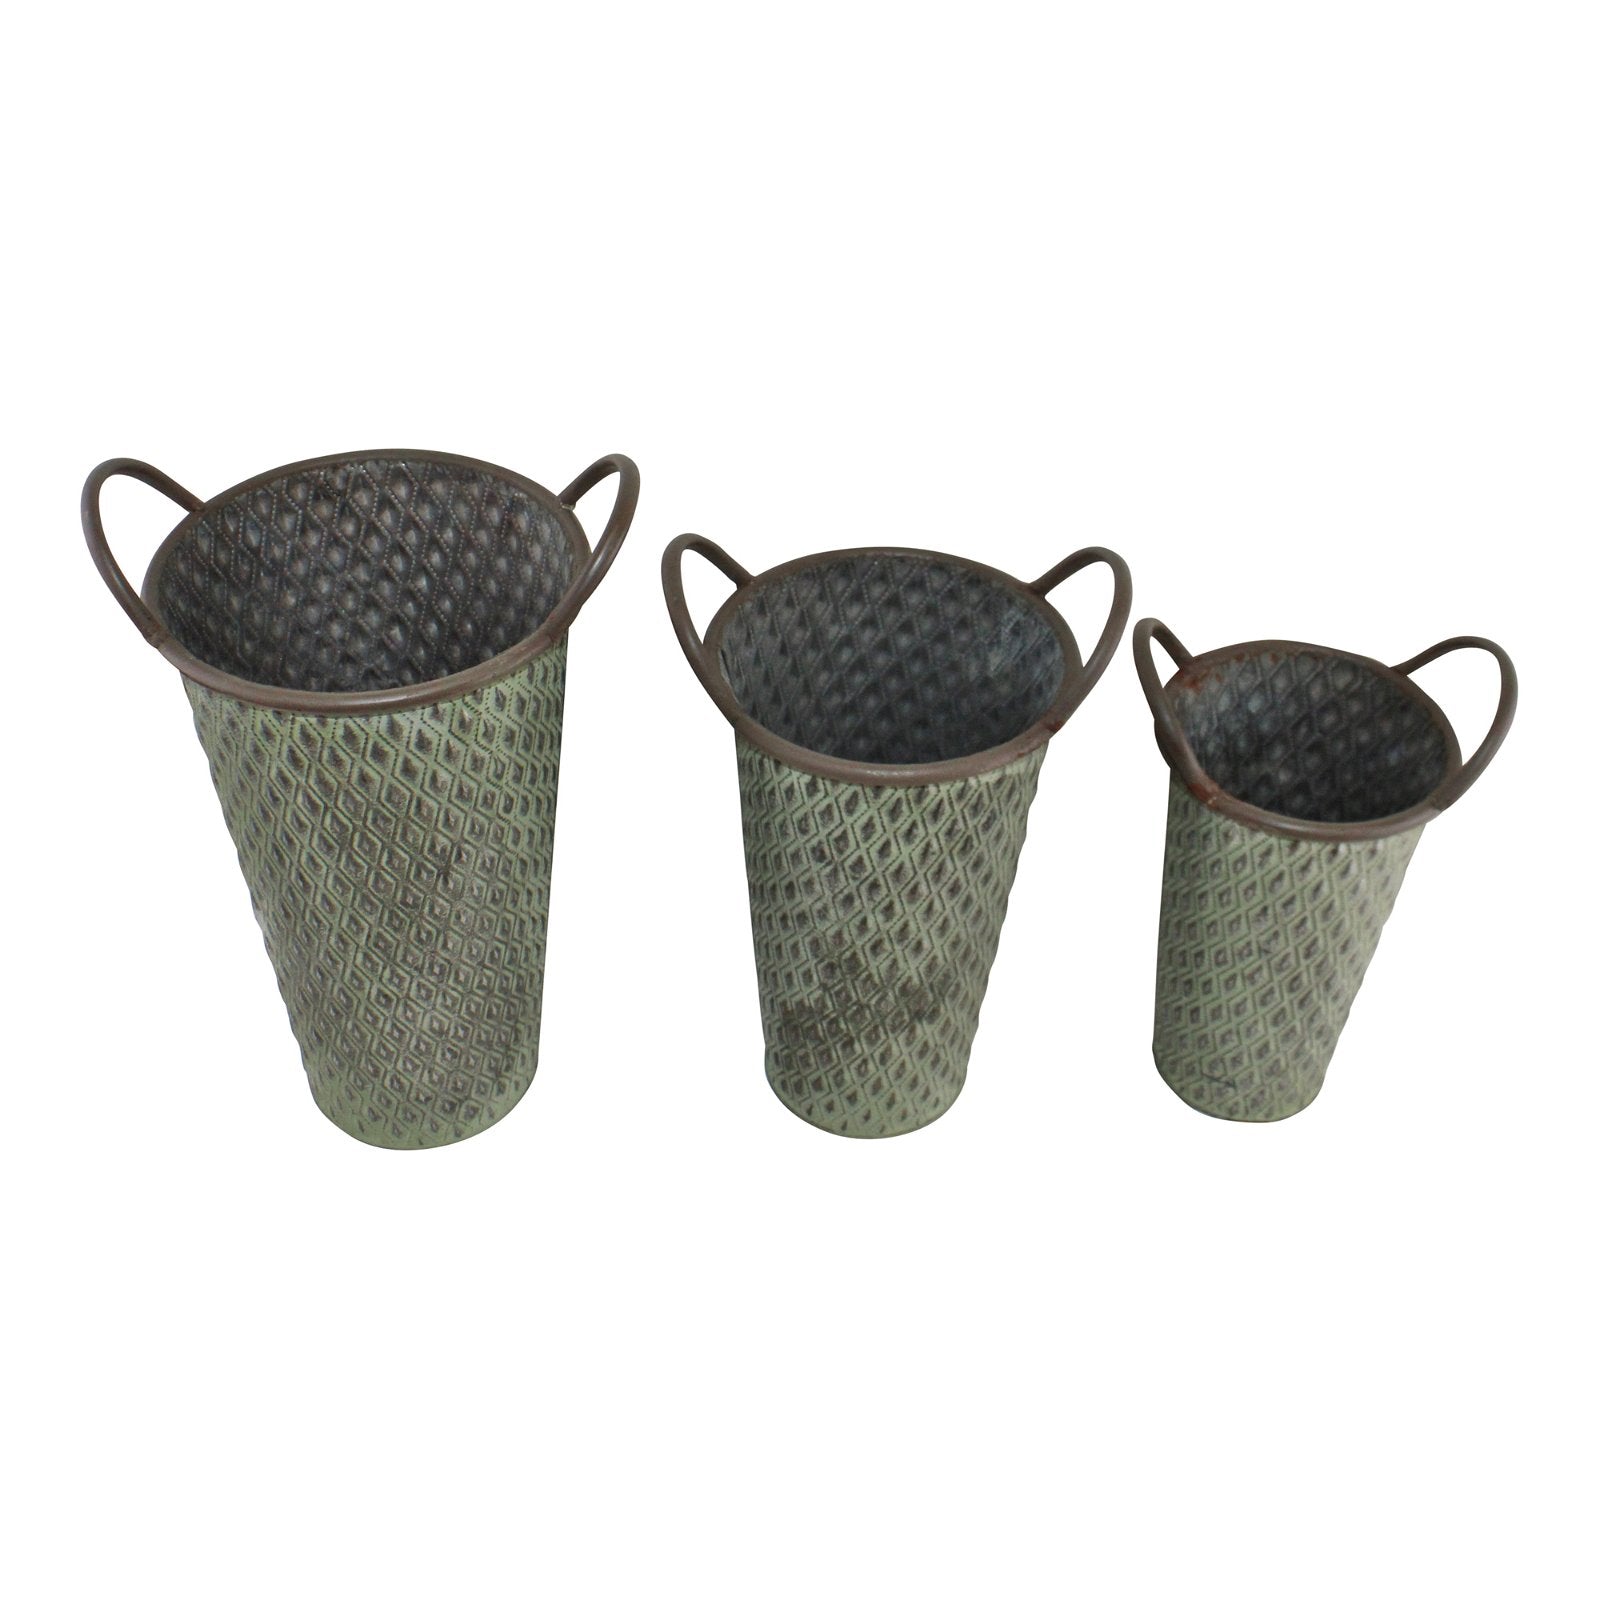 Set of 3 Tall Zinc Planters in Green